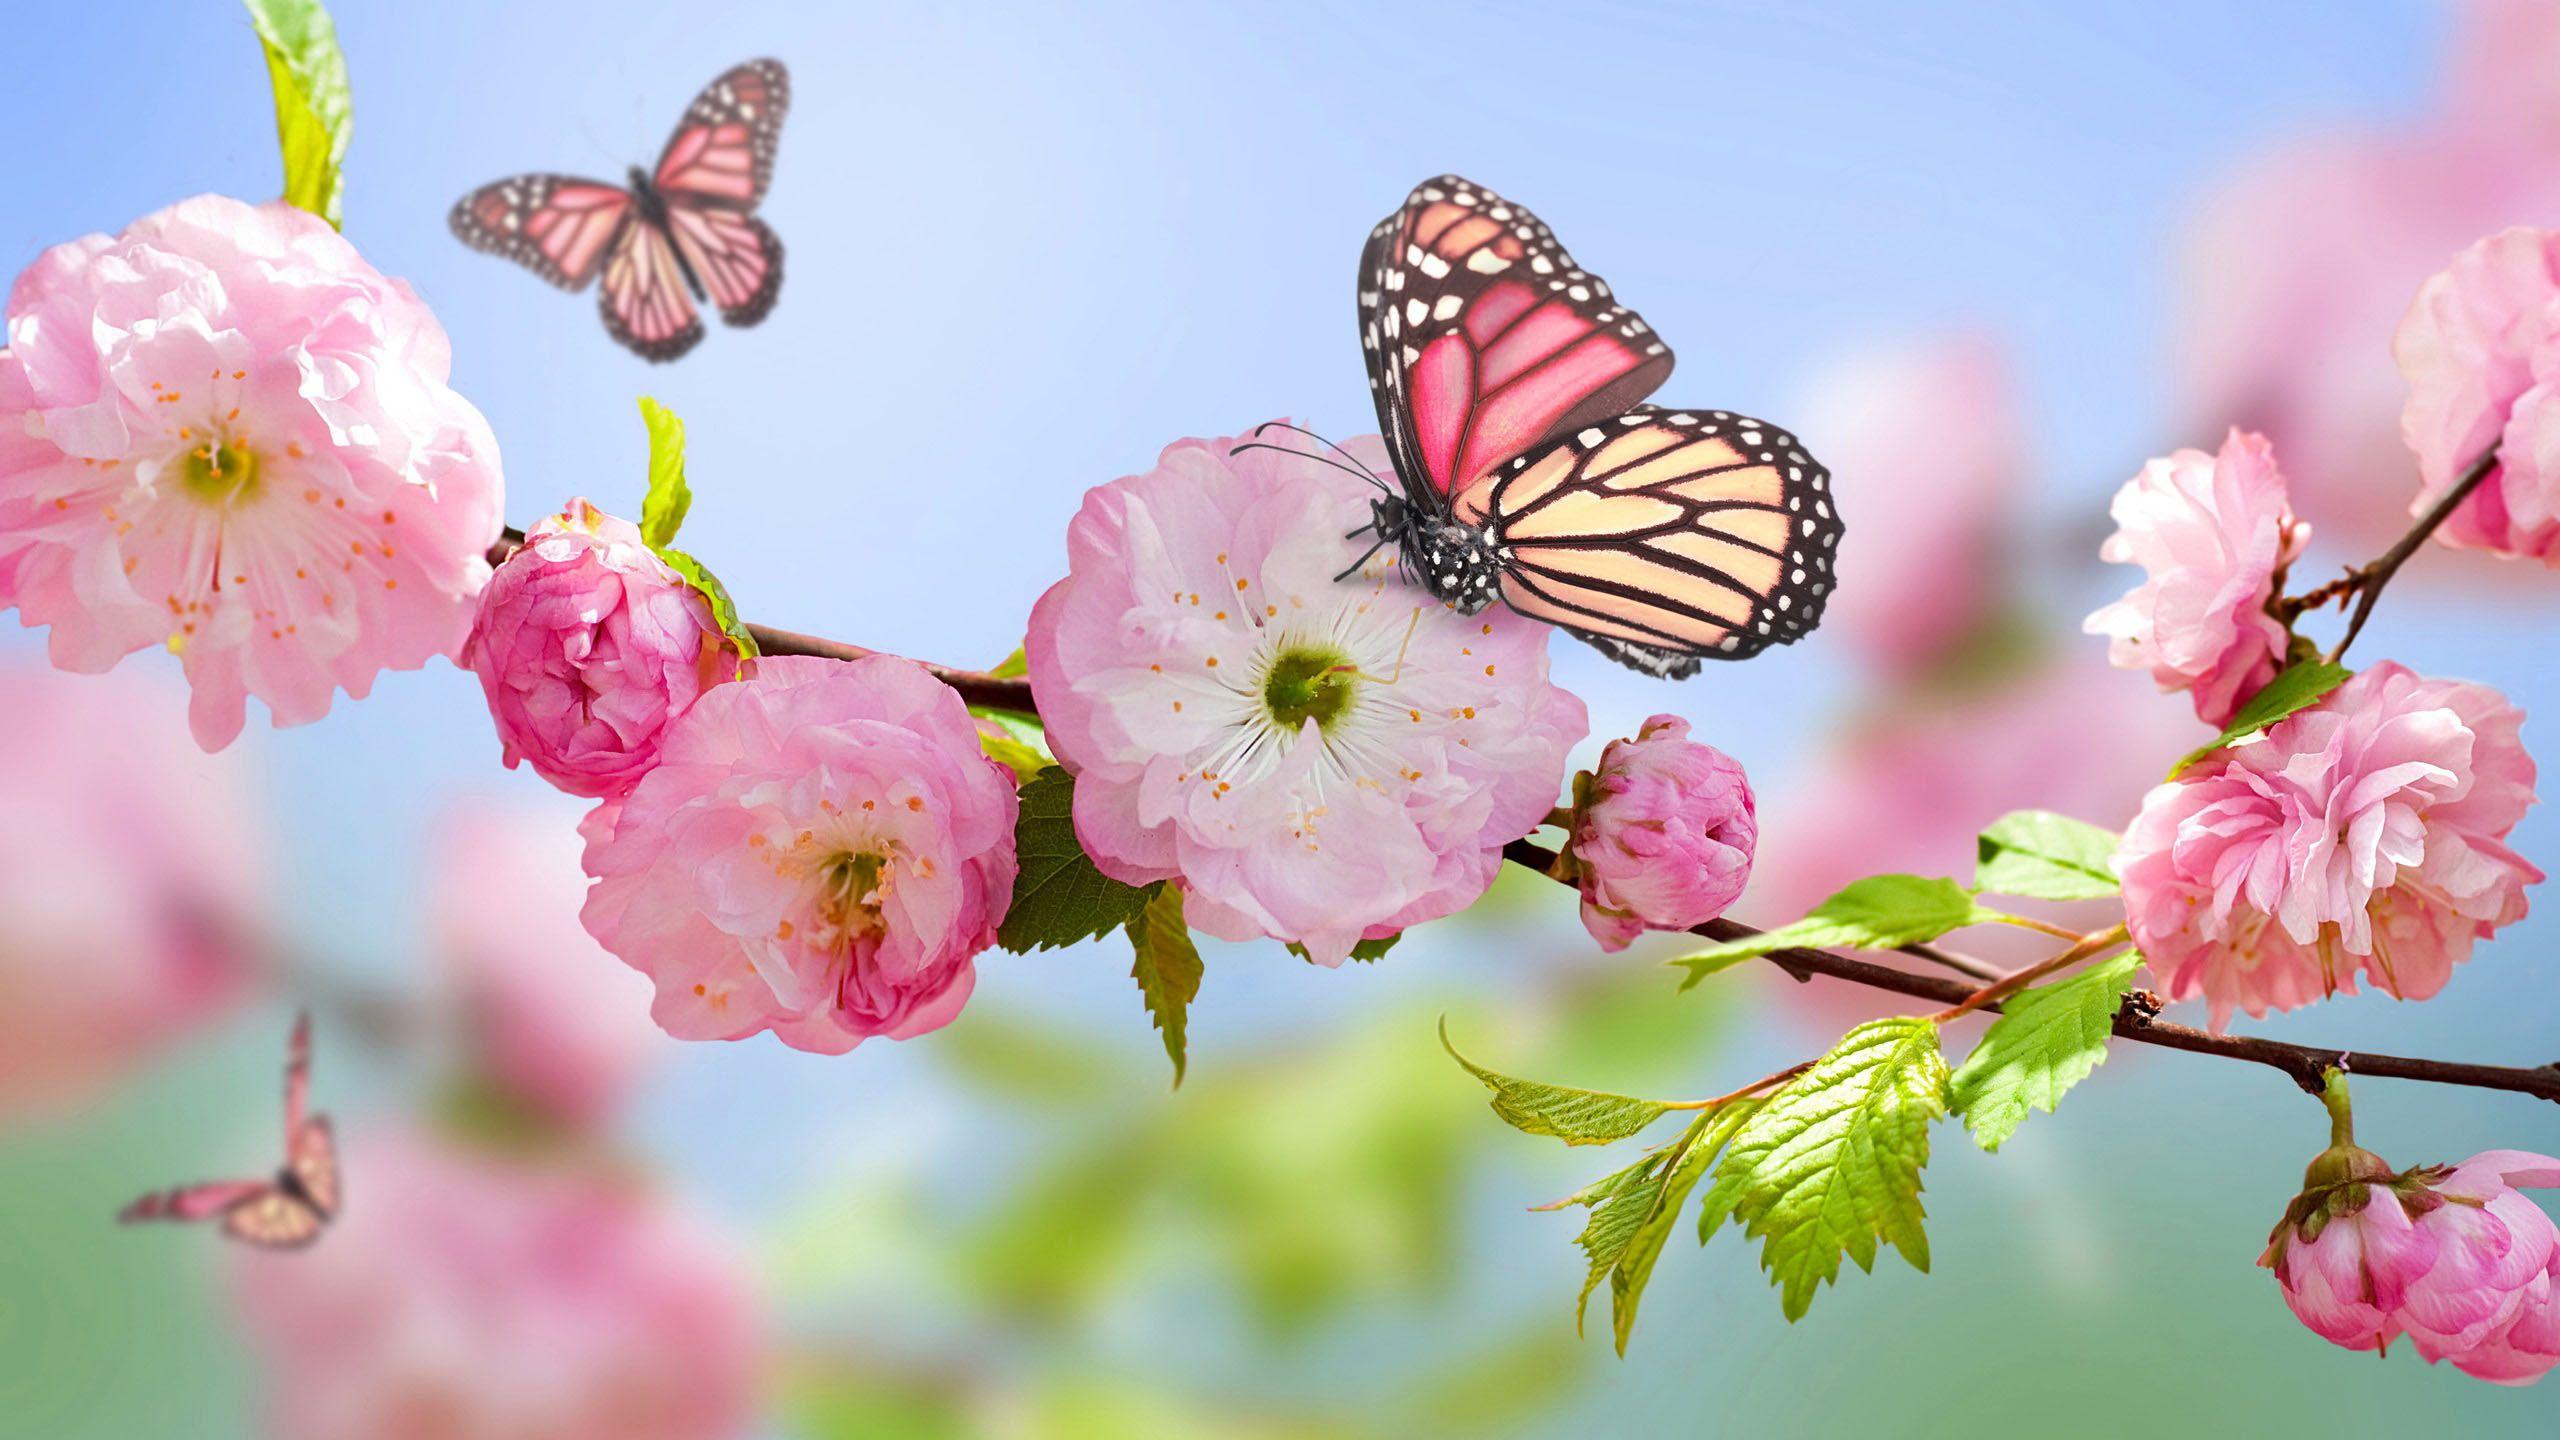 Nature Spring. Free Desktop Wallpaper for Widescreen, HD and Mobile